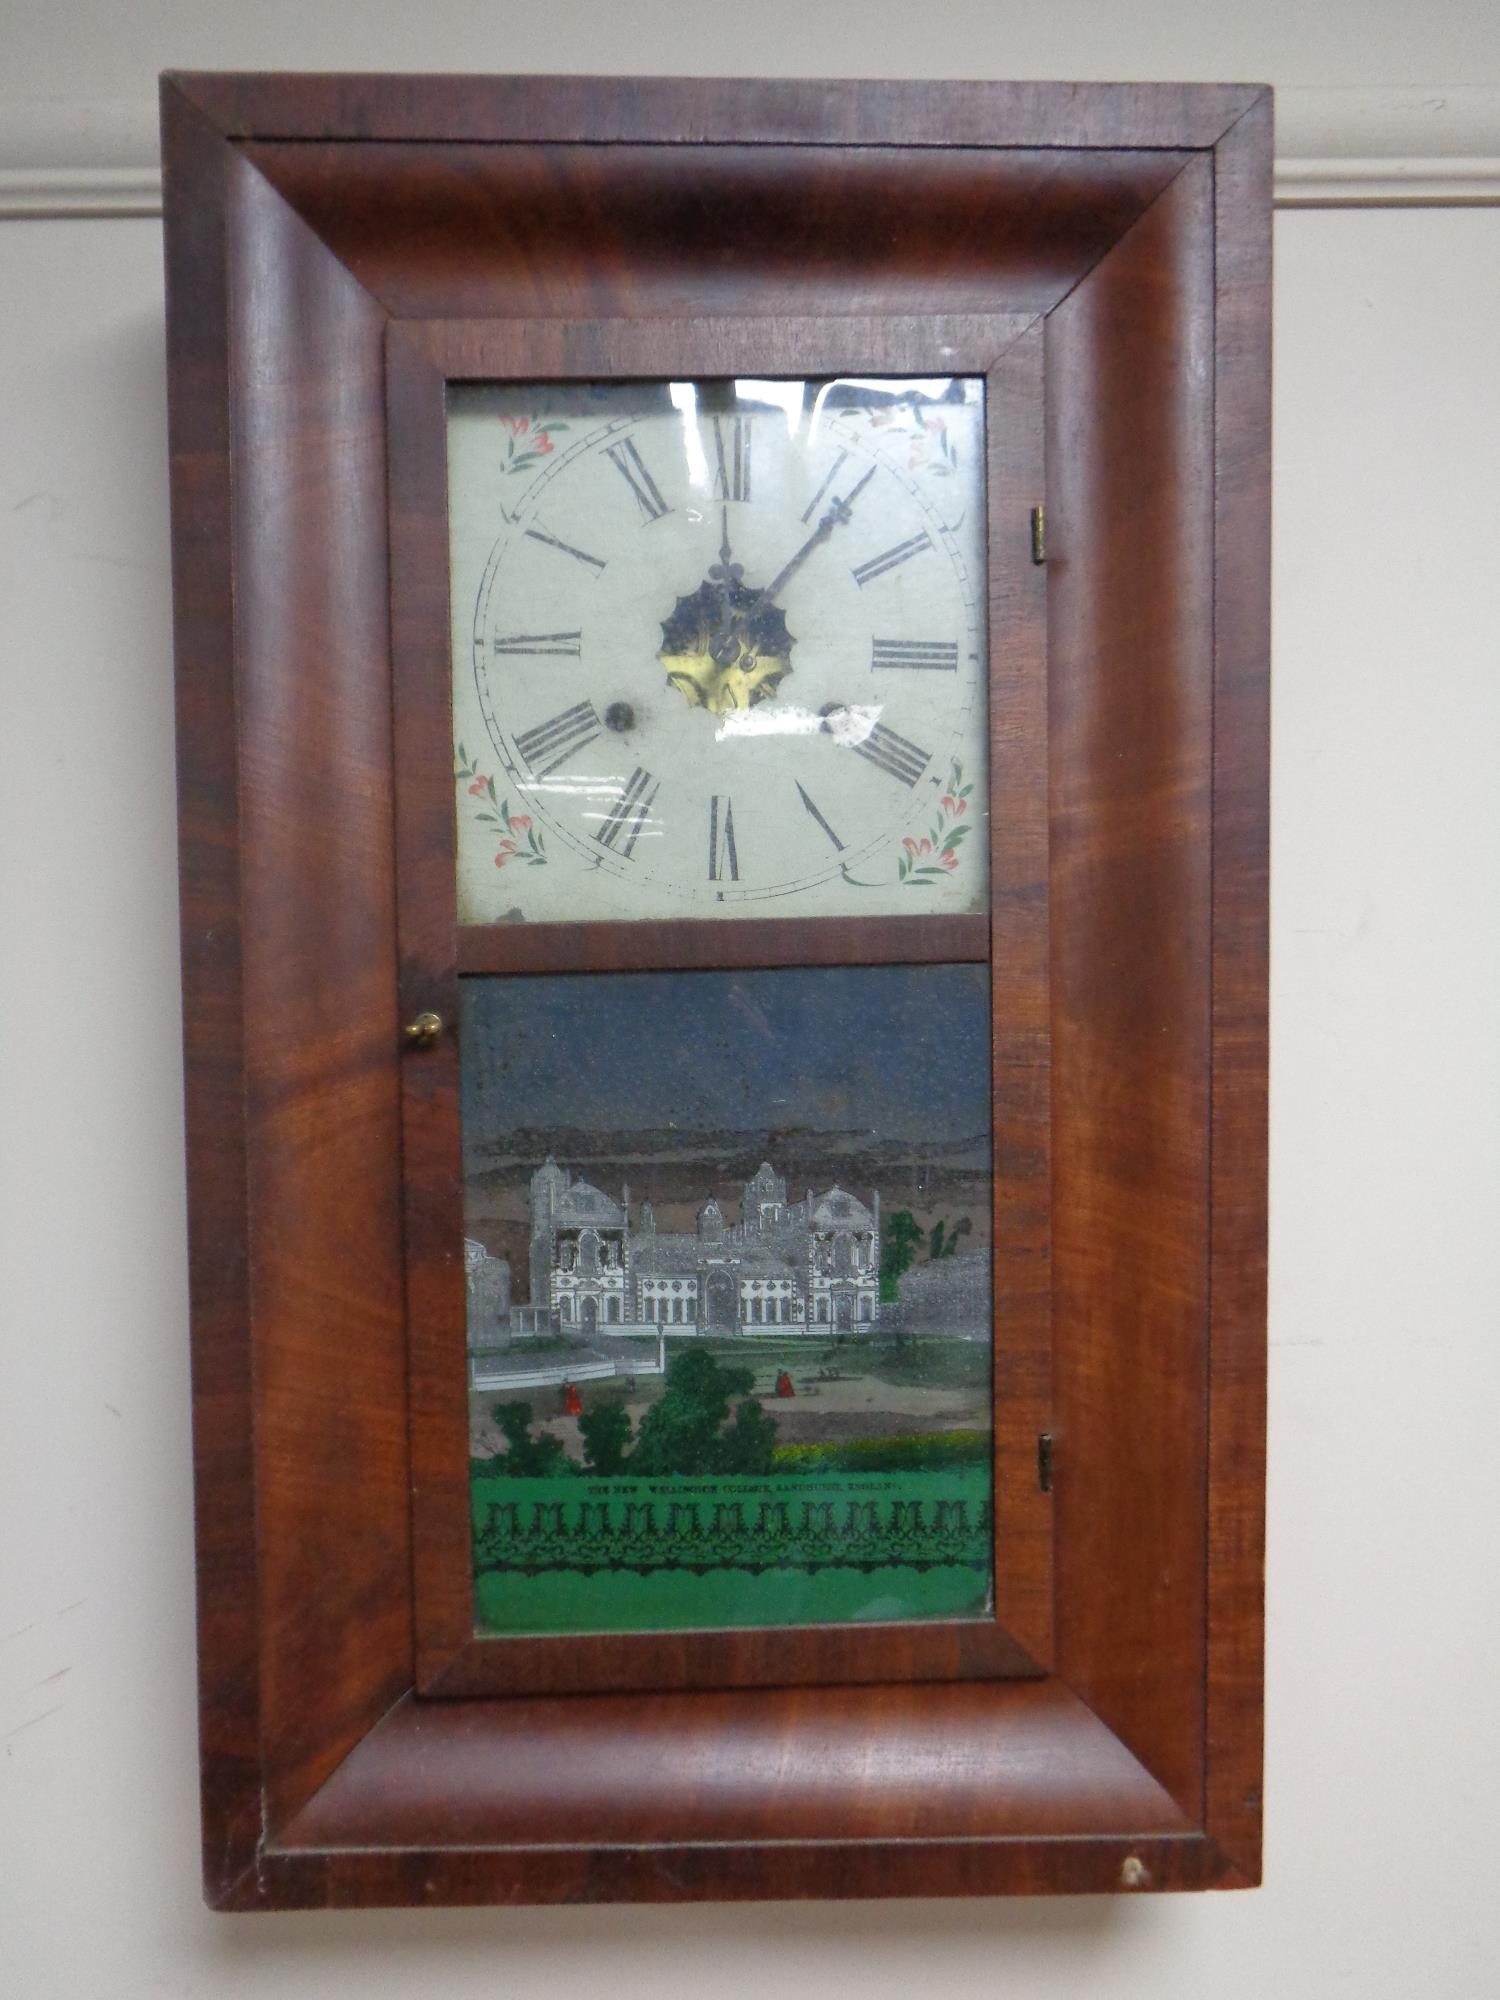 An antique American Jerome and Company 30 hour wall clock with glass panel depicting The New